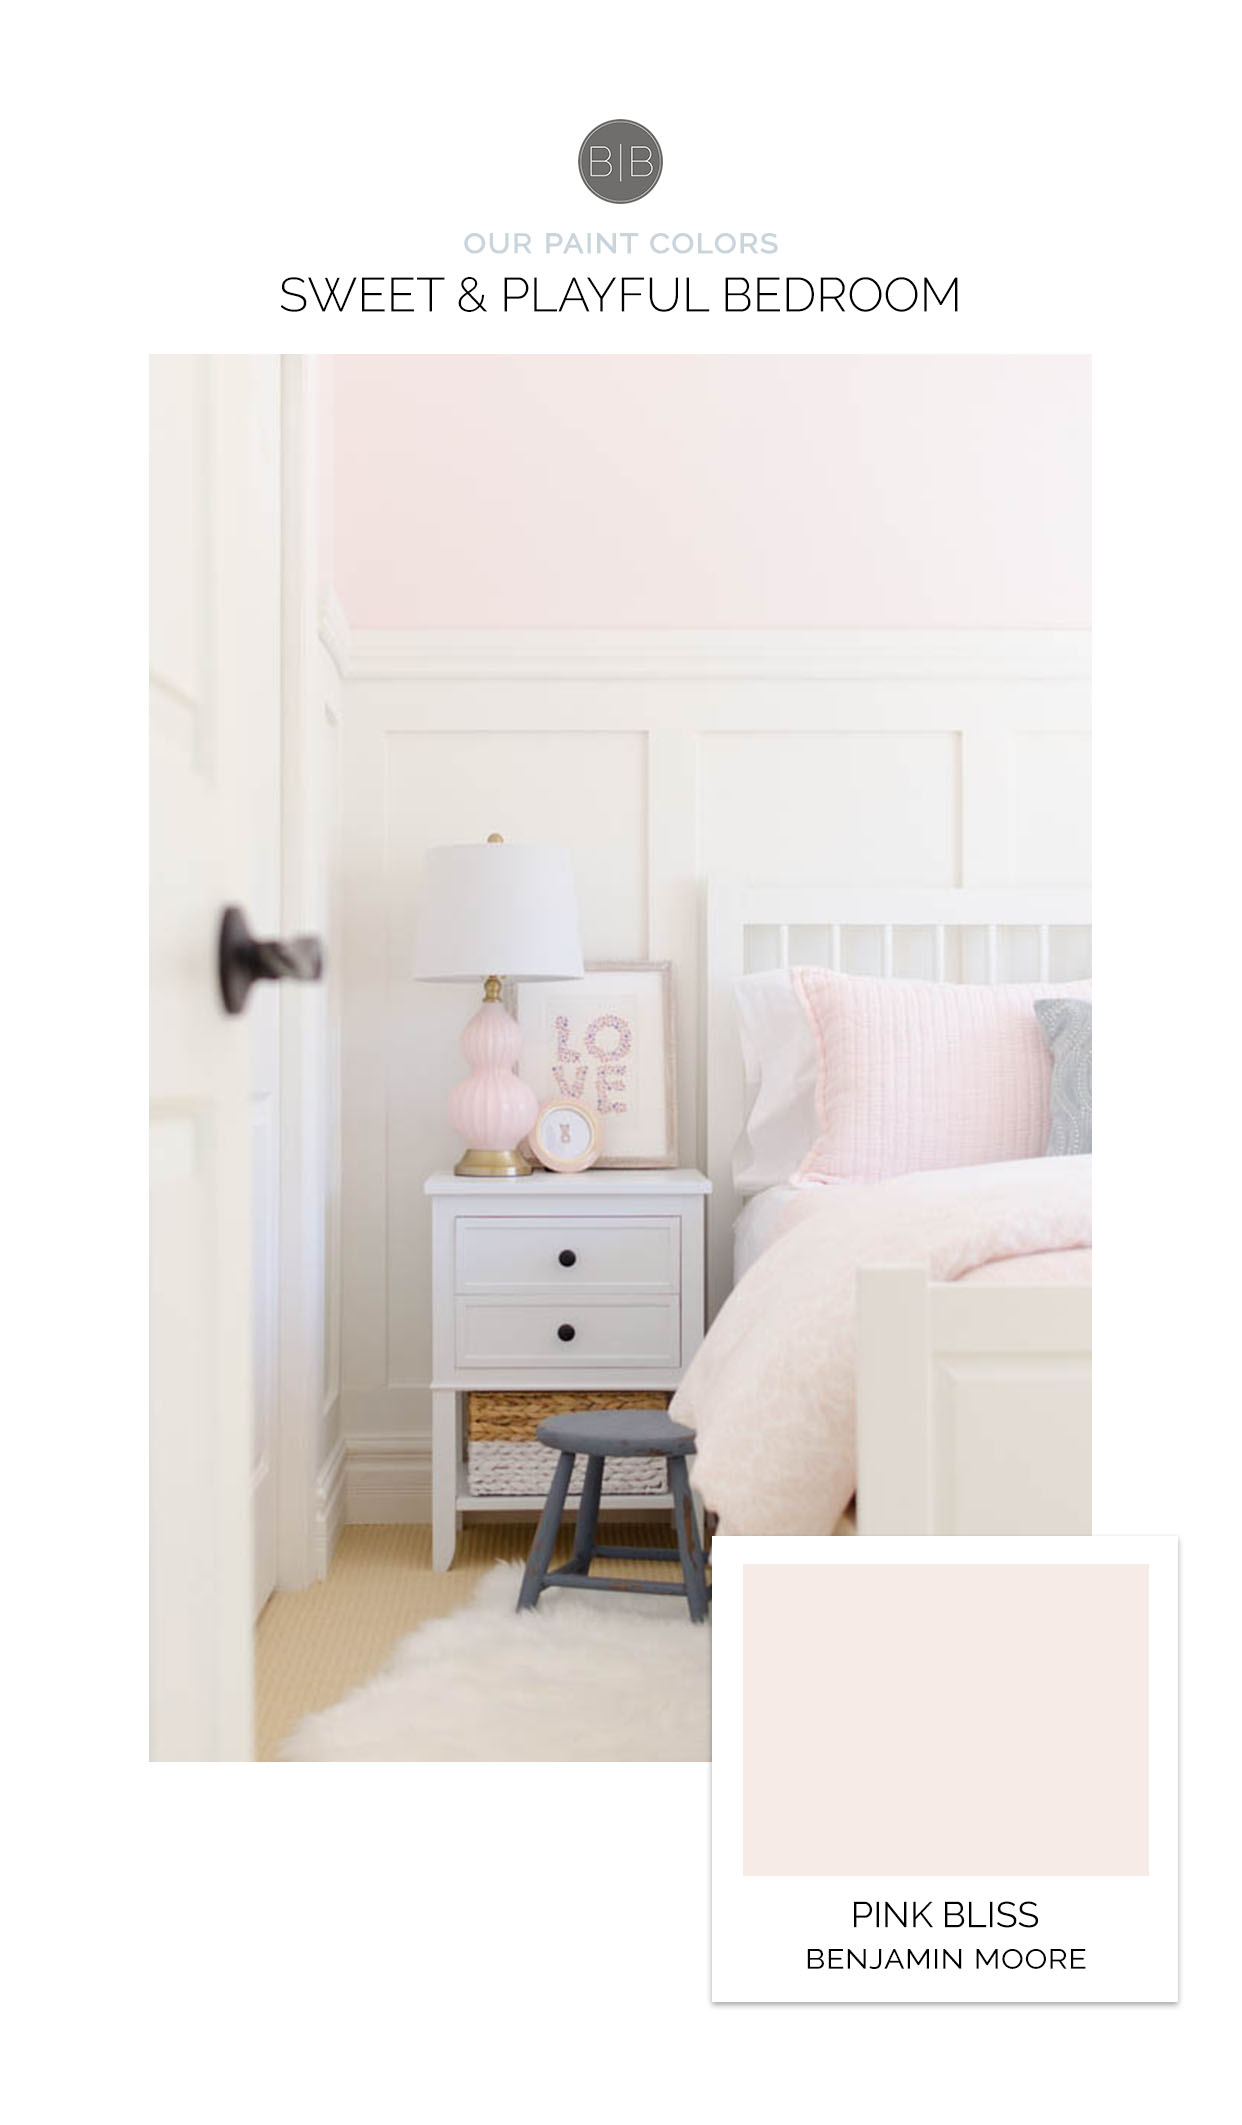 https://www.nickandalicia.com/wp-content/uploads/2019/01/Paint-Colors-Toddler-Bedroom.jpg